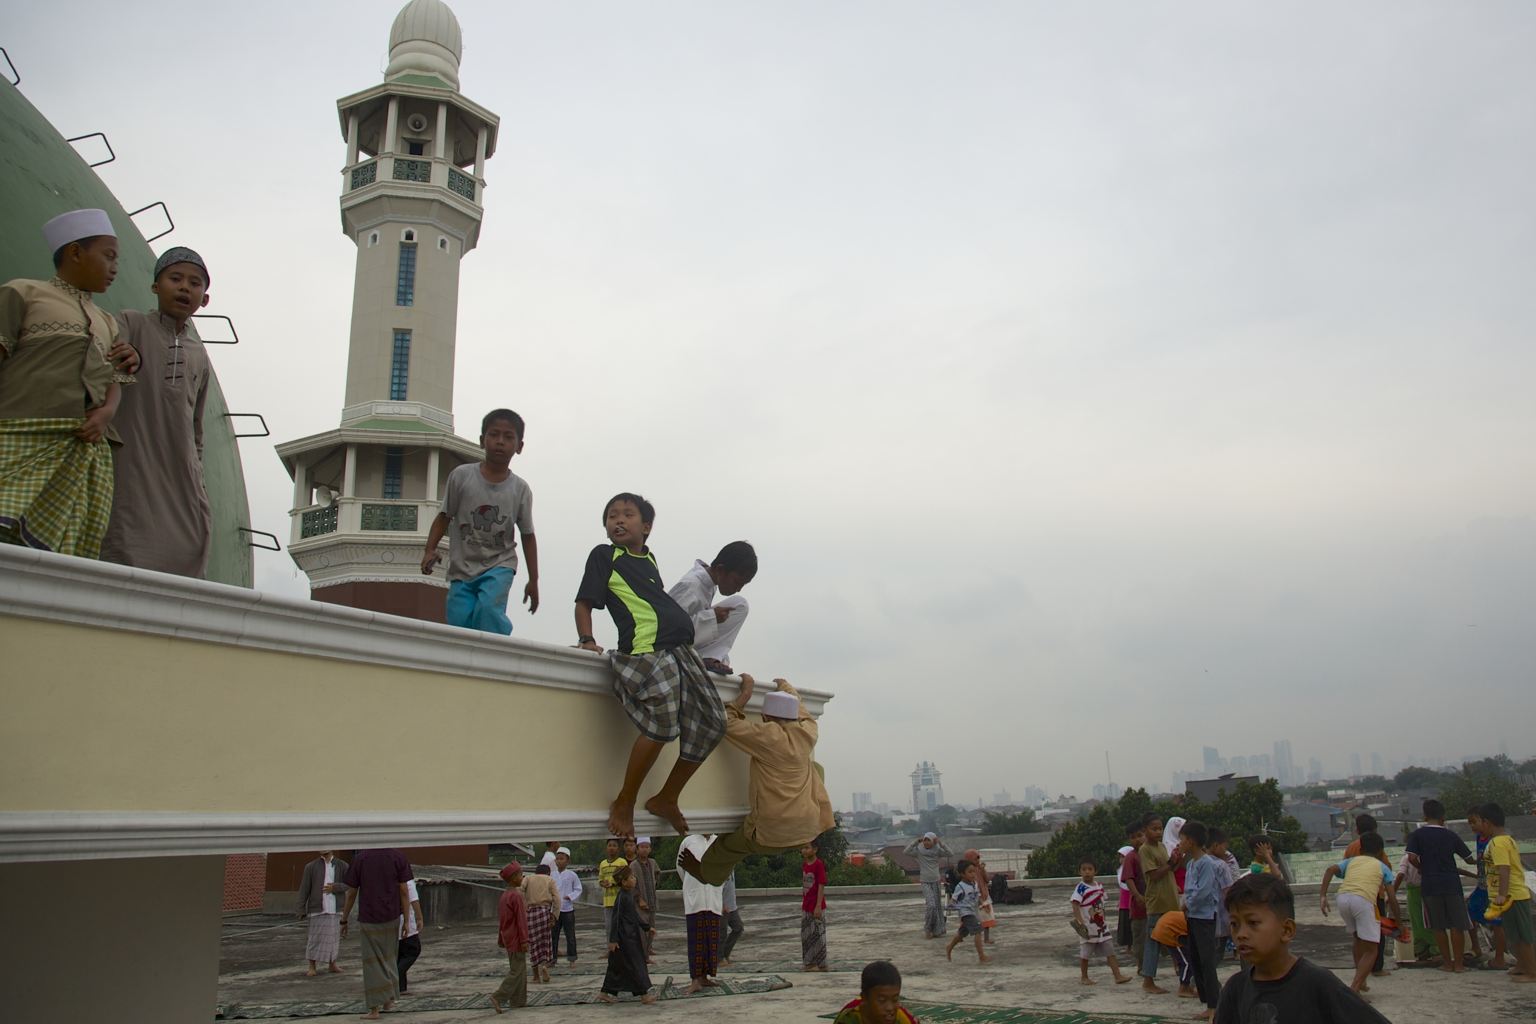 indonesianmuslimsobservefirstday20140627 2 - In pictures: Ramadhan 2014 around the world